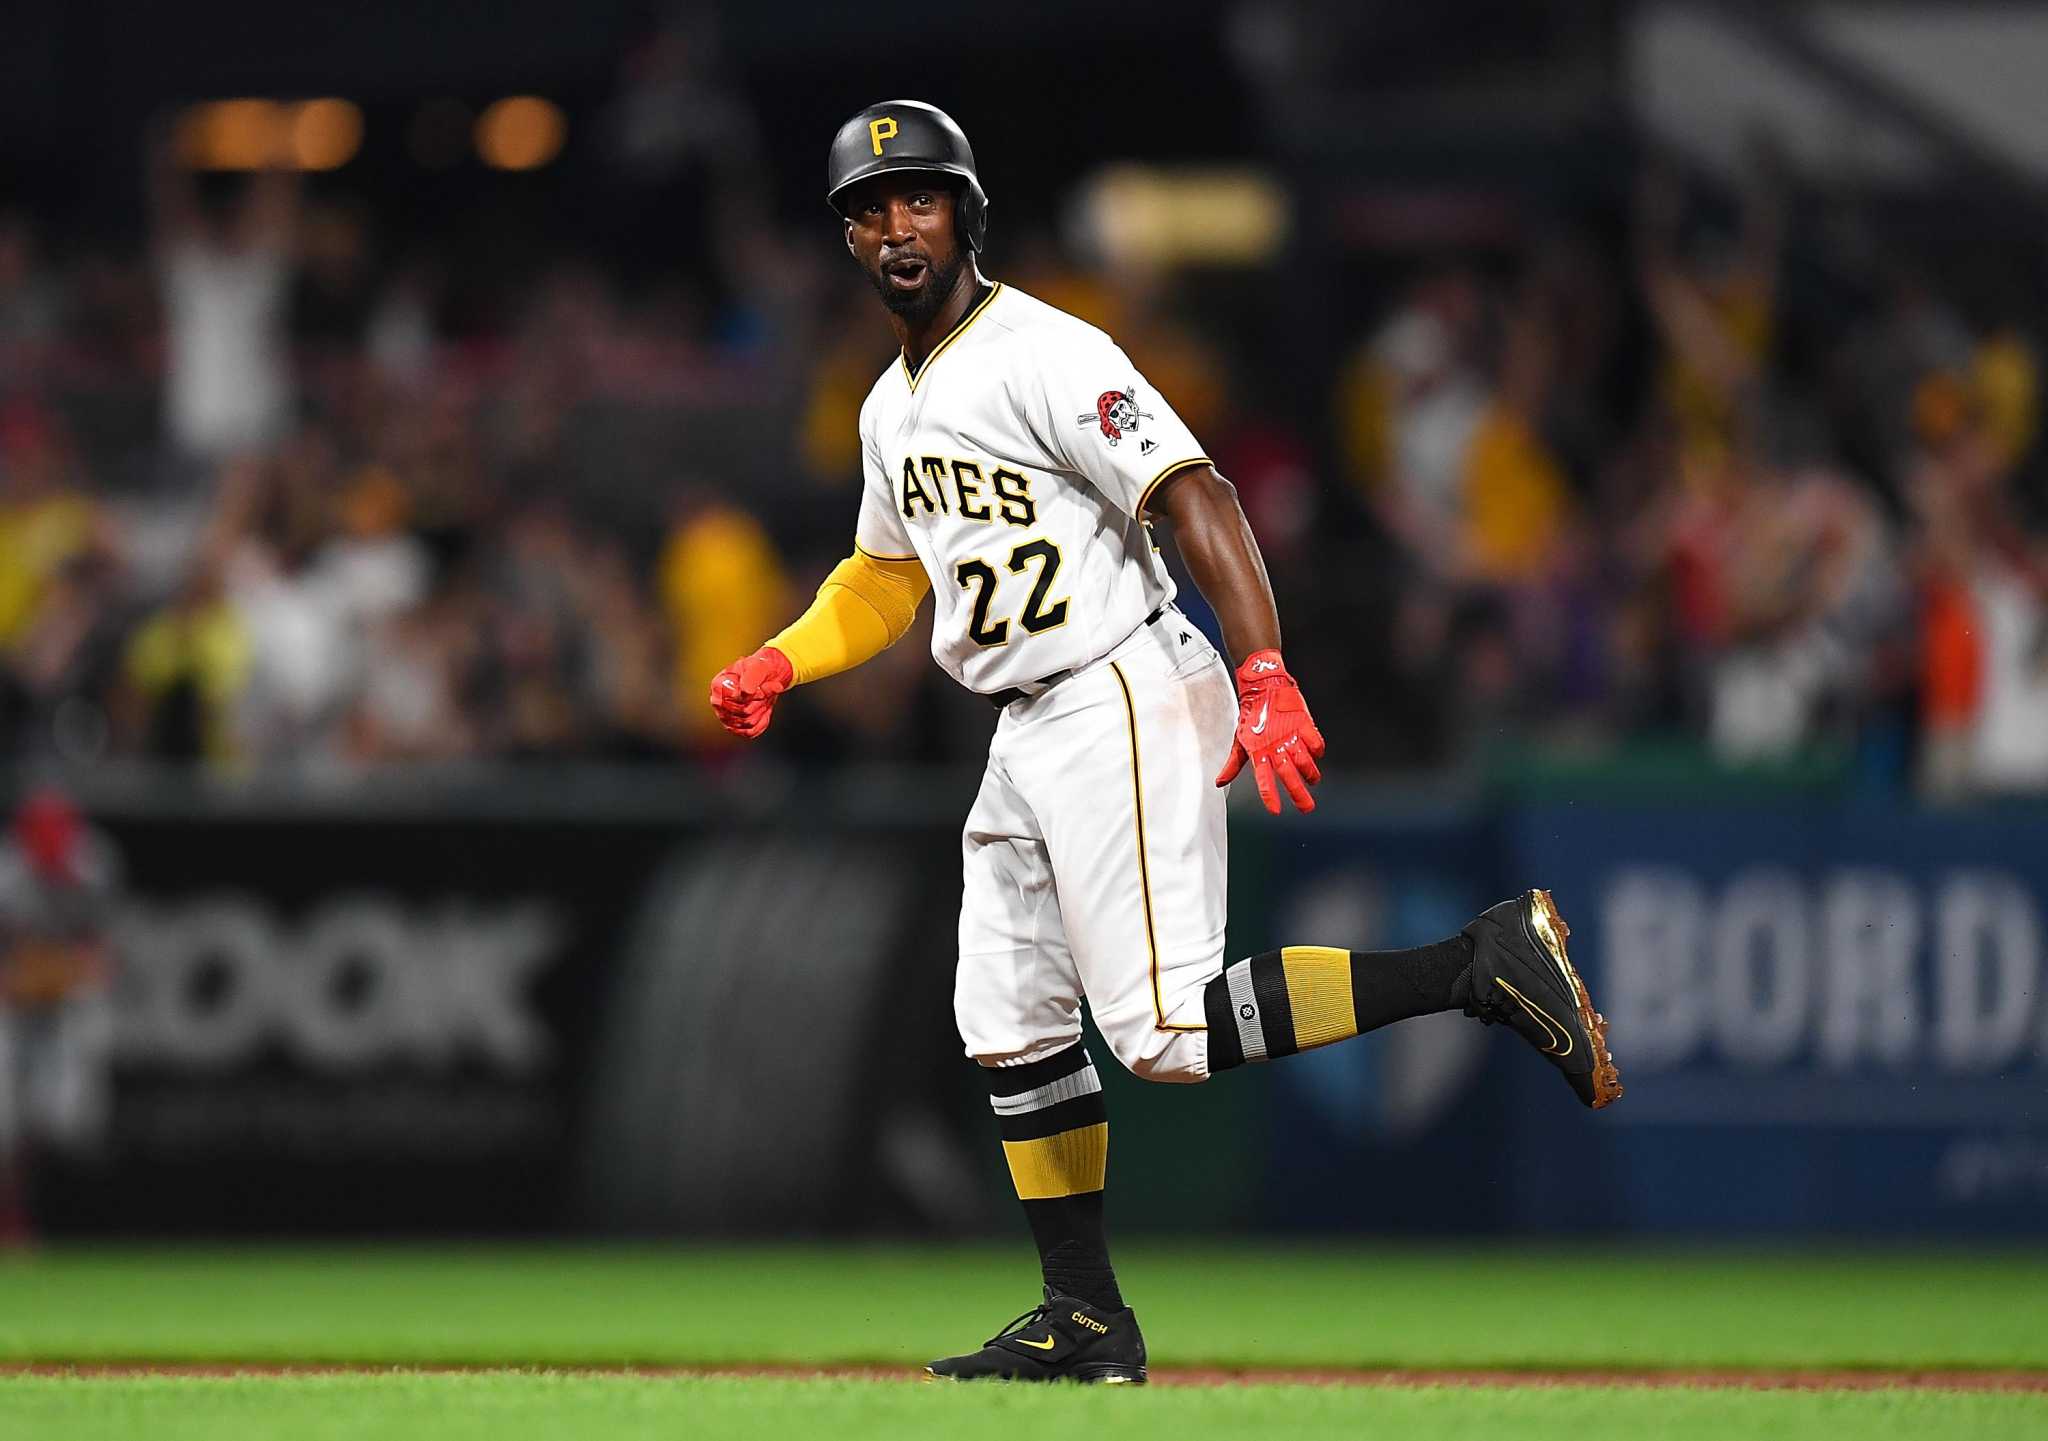 Andrew McCutchen's 2022 season reviewed by Brewers.